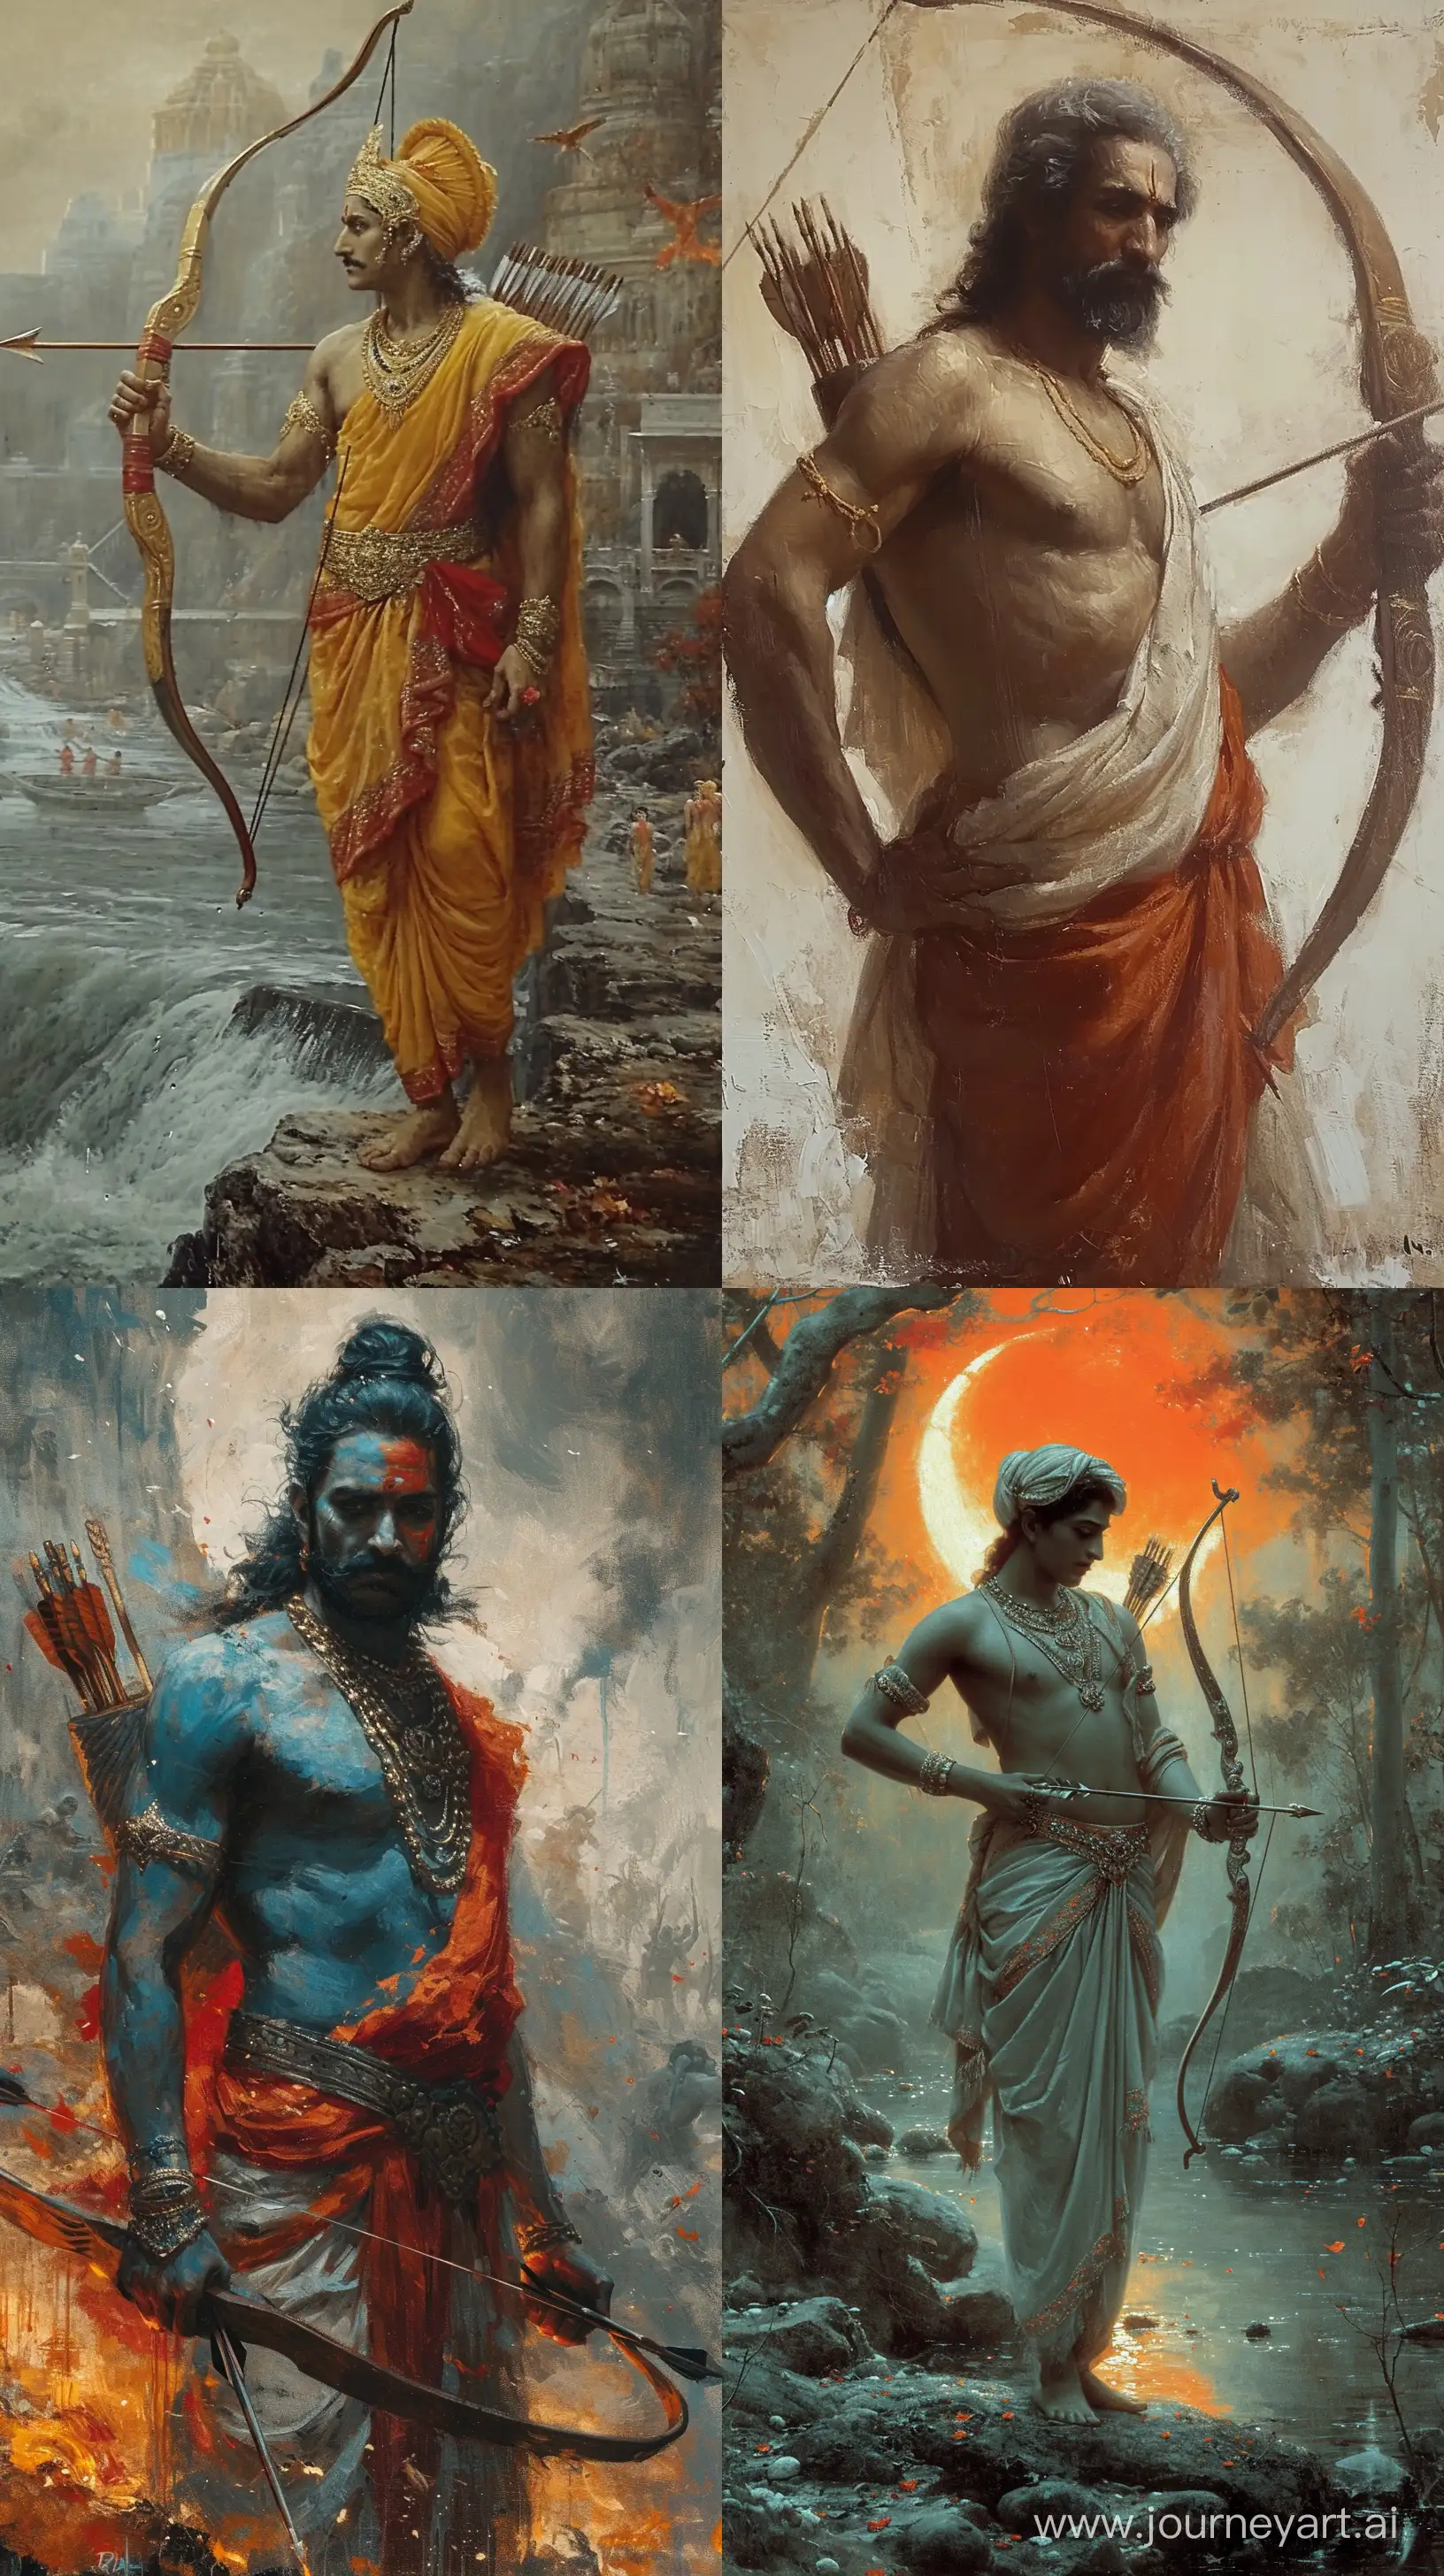 Divine-Artistry-Lord-Ram-Gracefully-Wielding-Bow-and-Arrow